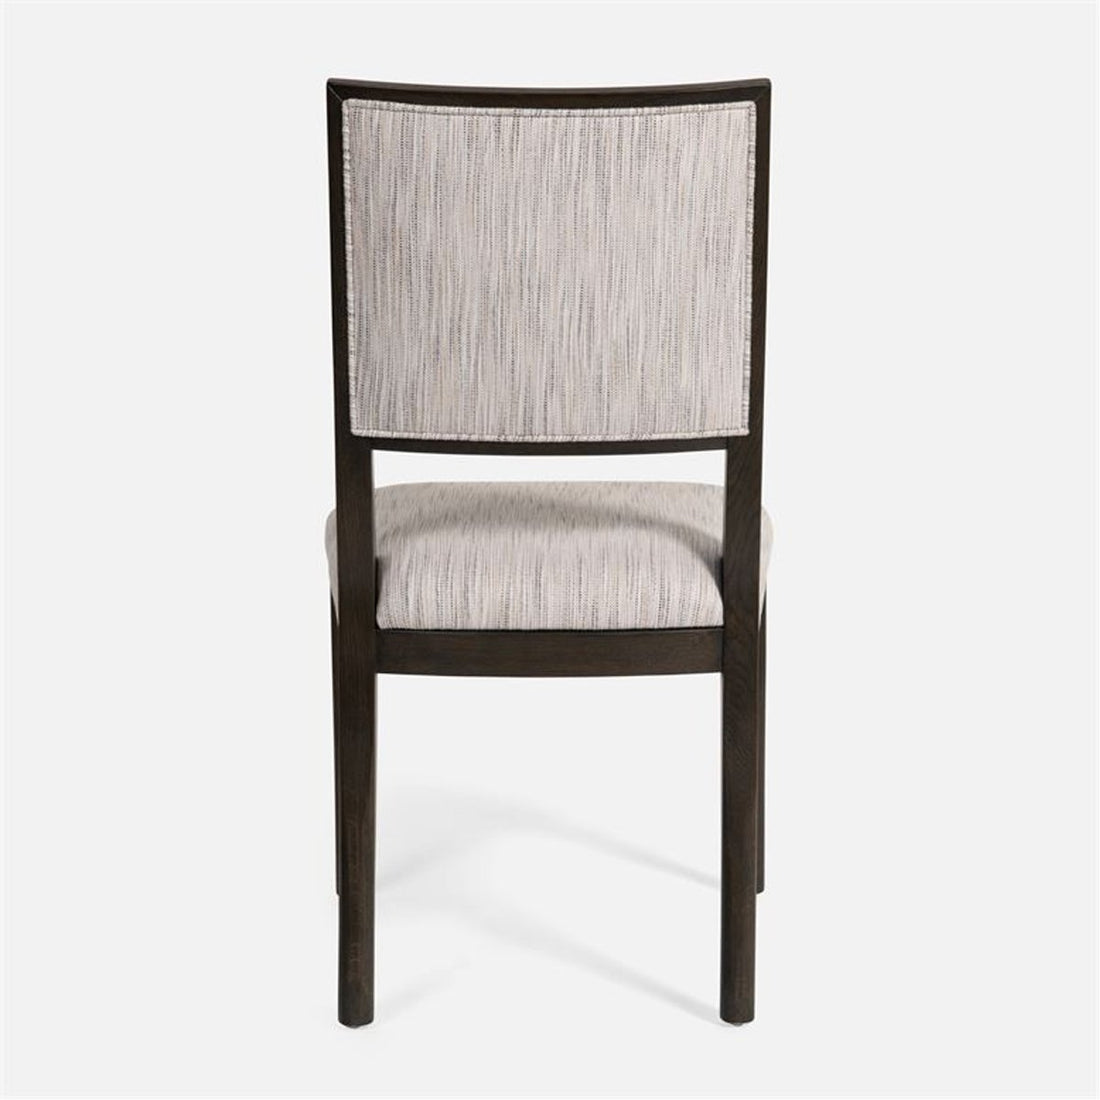 Made Goods Nelton Upholstered Dining Chair in Severn Canvas